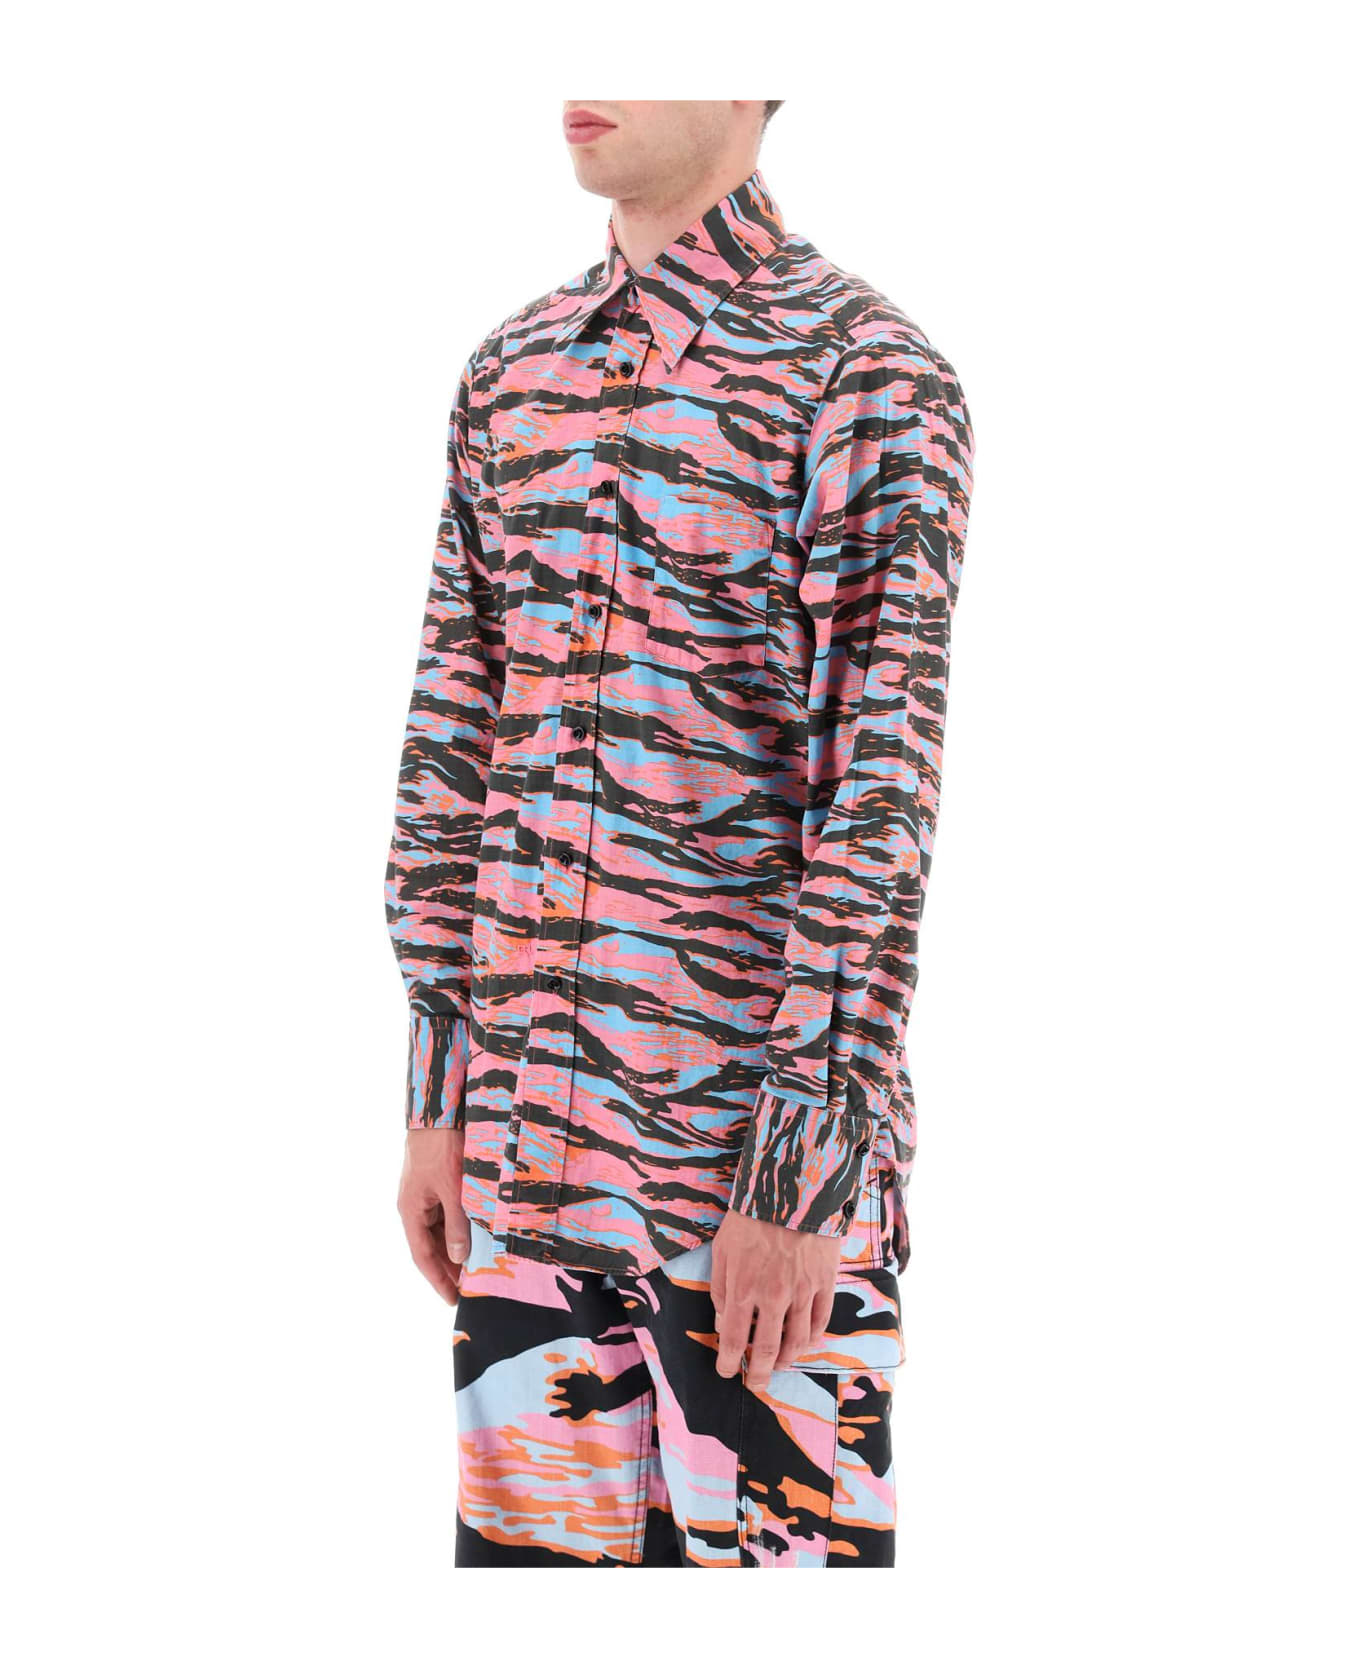 ERL Camouflage Cotton Shirt - ERL PINK RAVE CAMO 2 (Black)